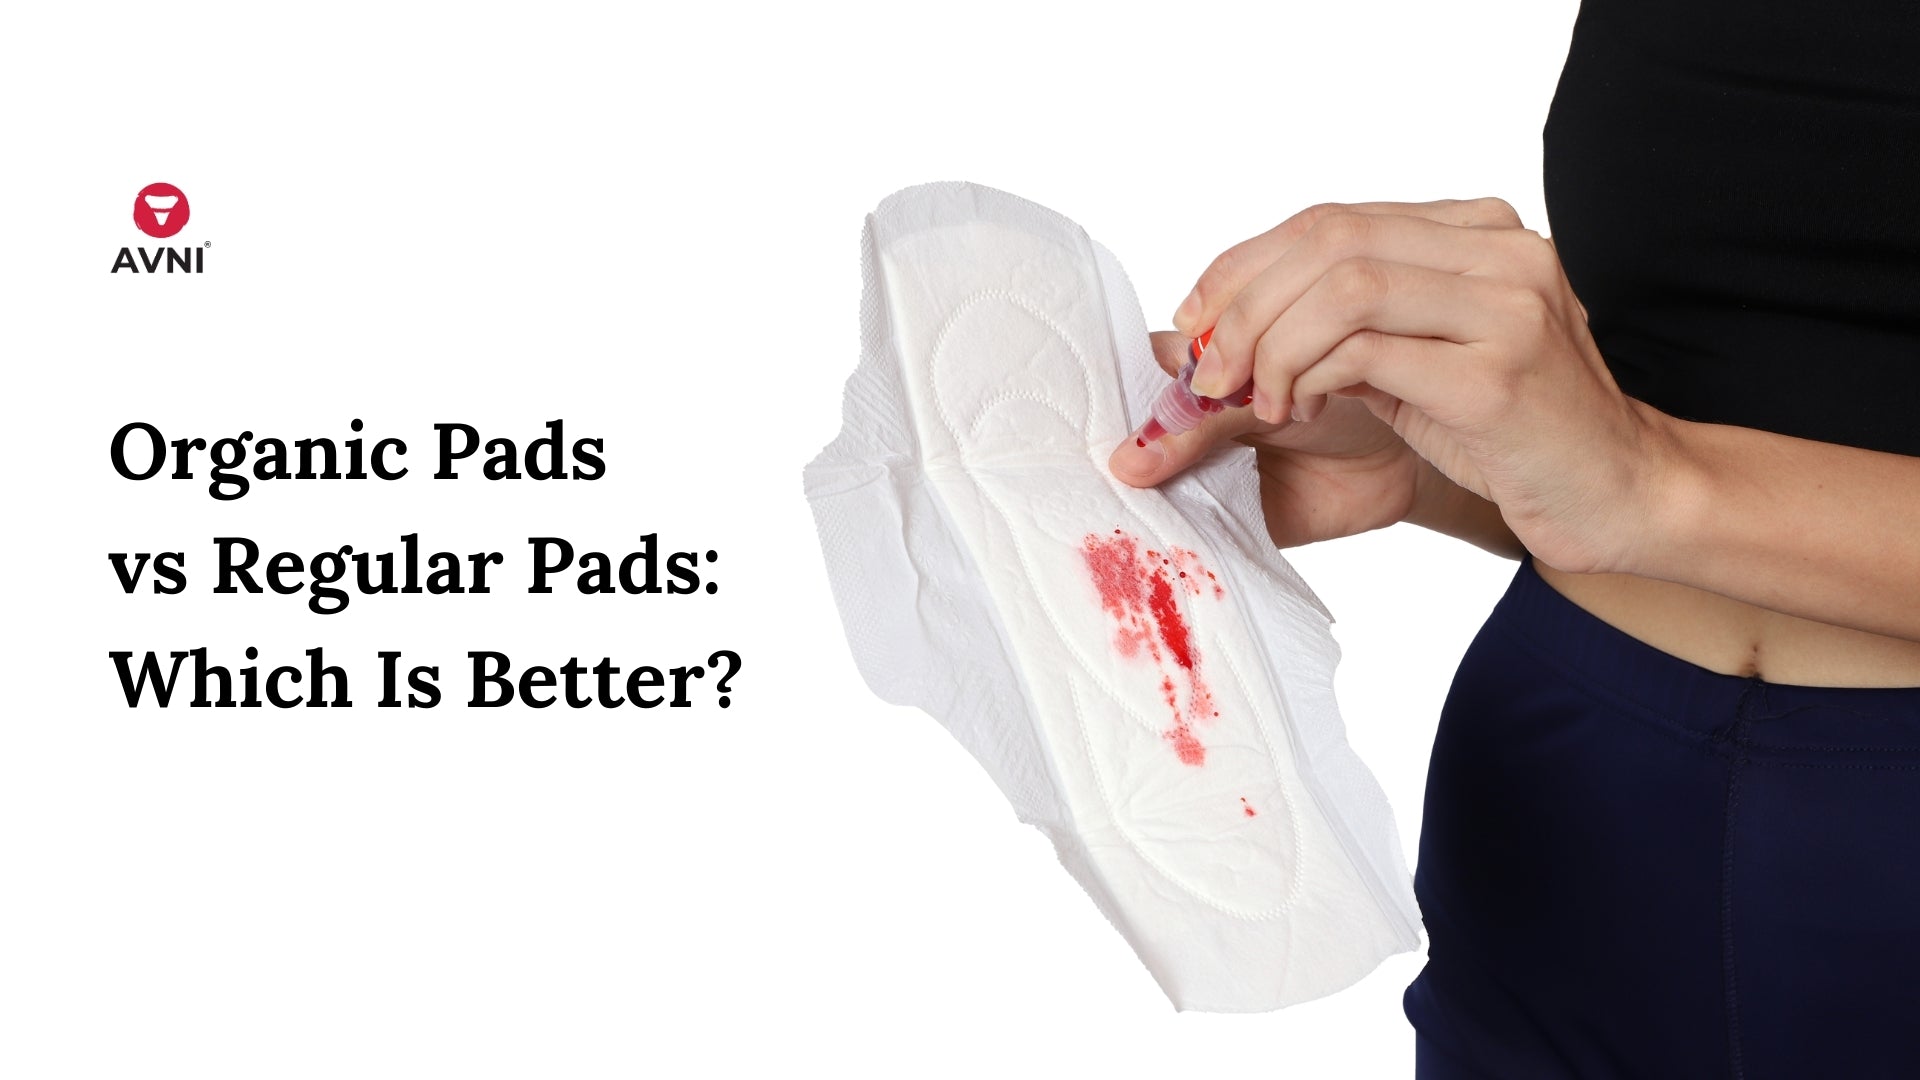 Organic Pads vs Regular Pads: Which Is Better?